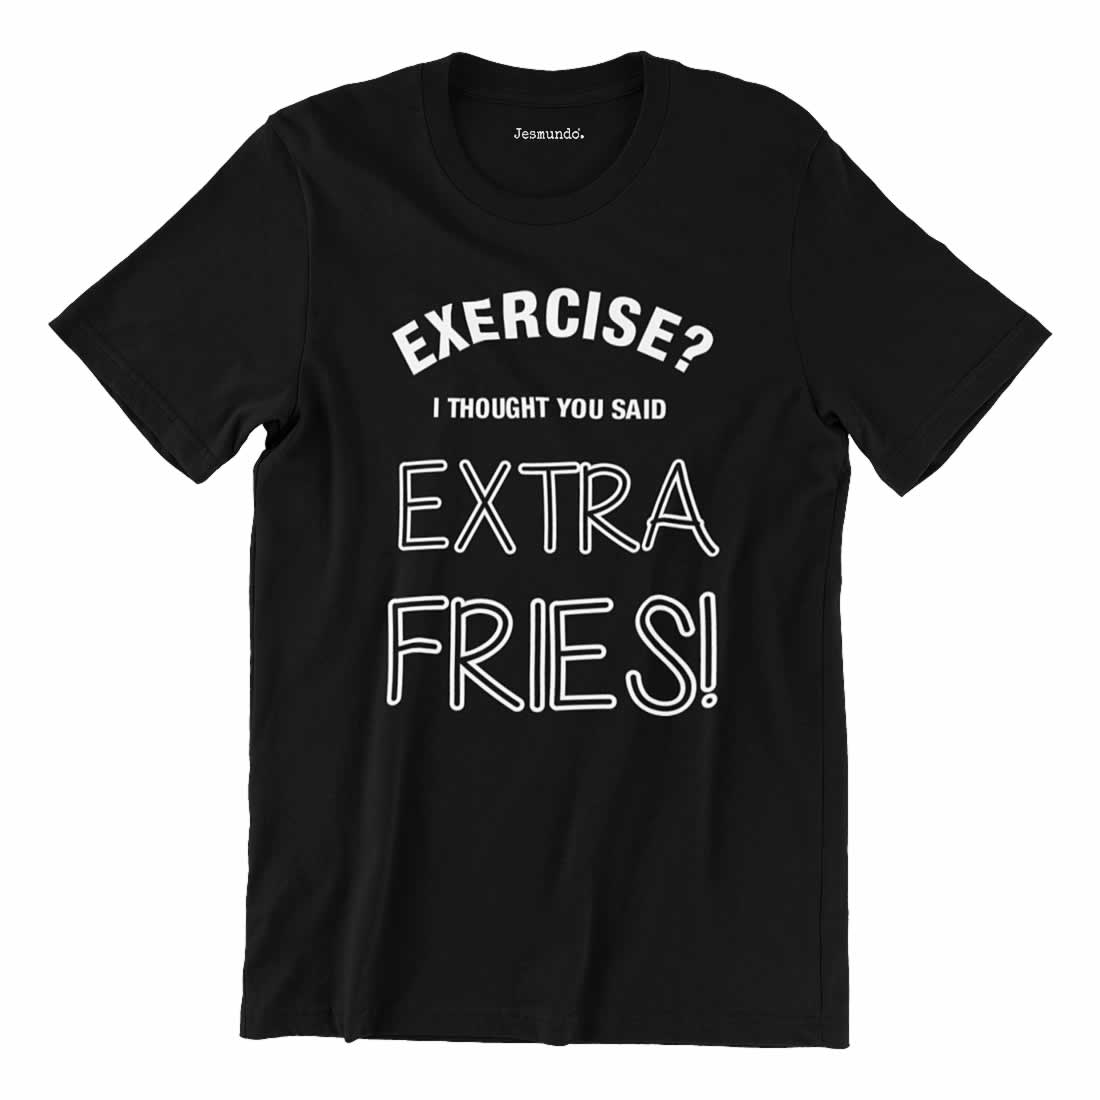 Exercise I Thought You Said Extra Fries T-Shirt